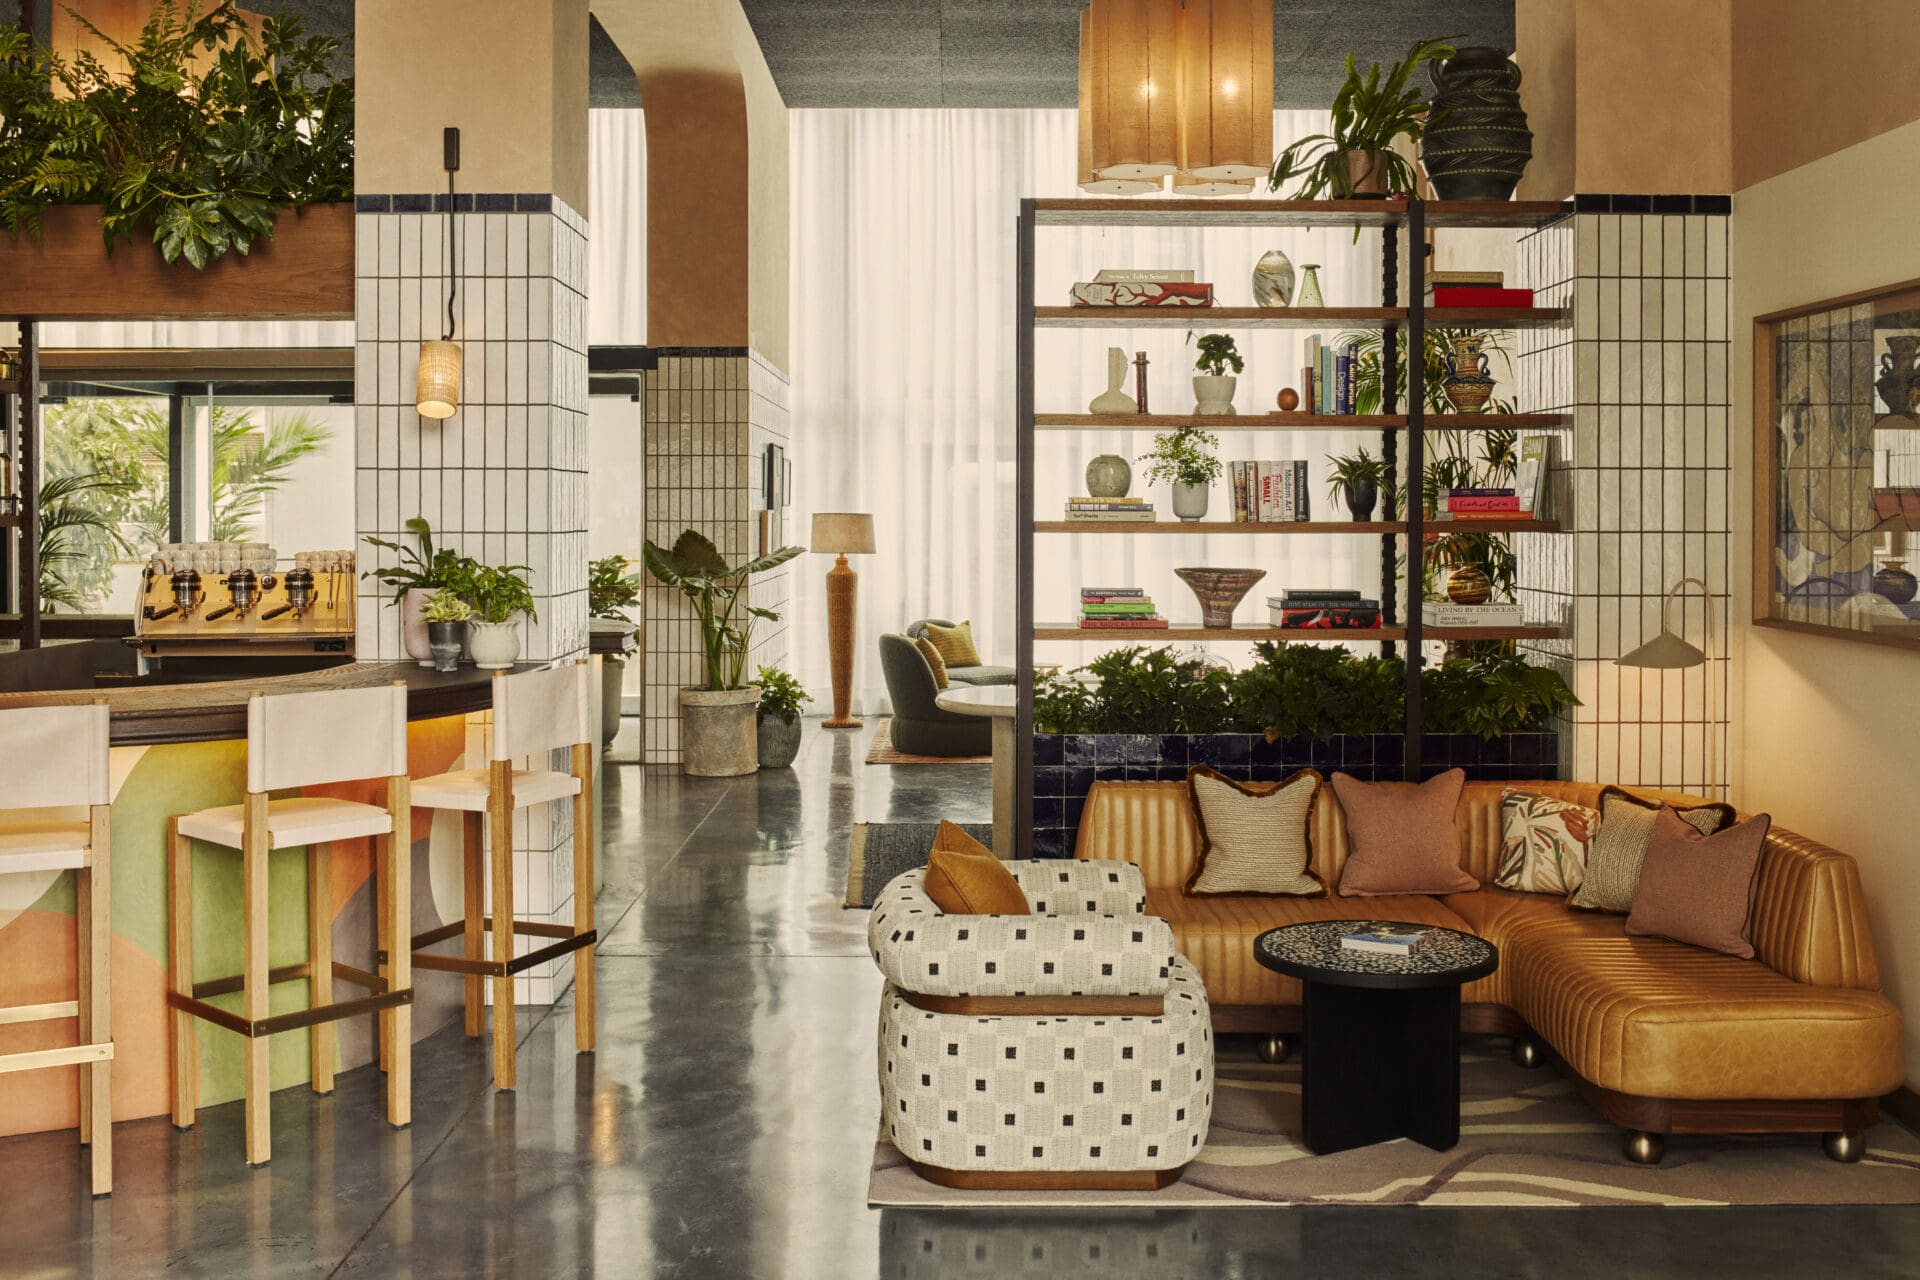 Best new hotels for summer 2022 | The Hoxton's new Barcelona opening has a communal space with concrete floors, tan leather low sofas and tiled walls, and square lampshades